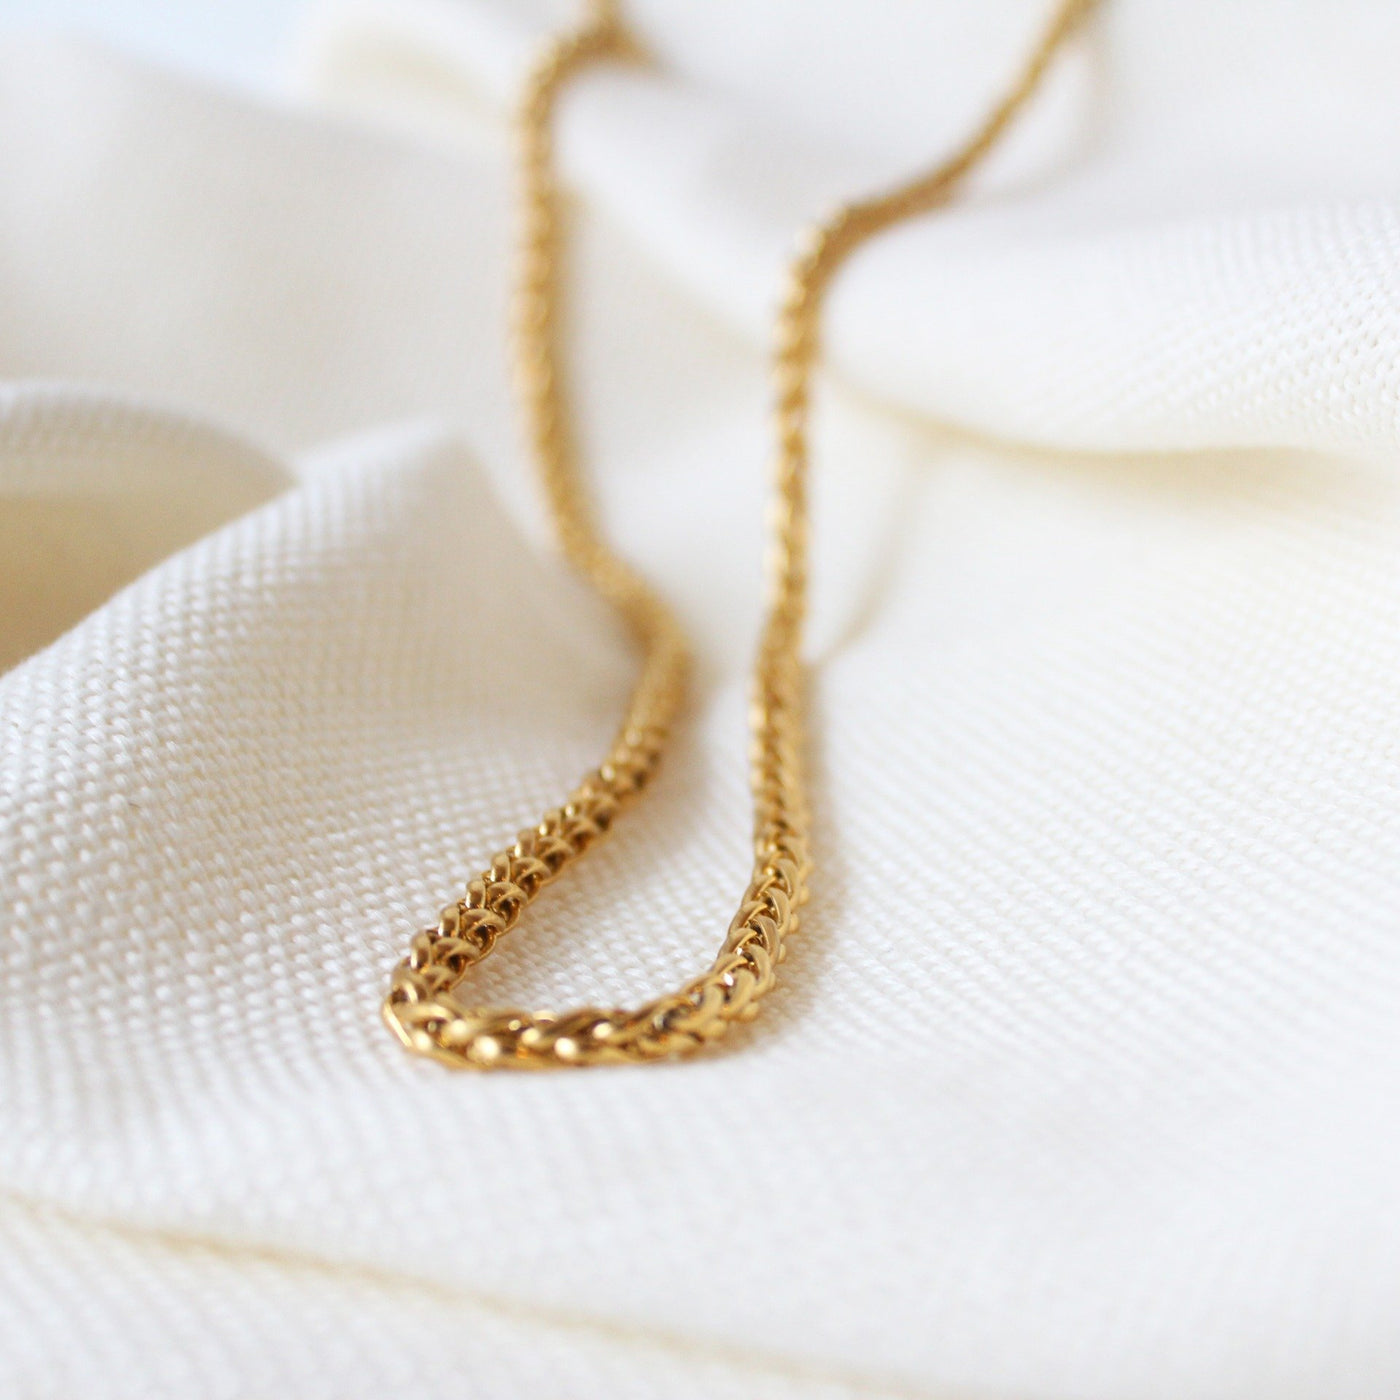 Exclusive Chain Necklace - Maral Kunst Jewelry